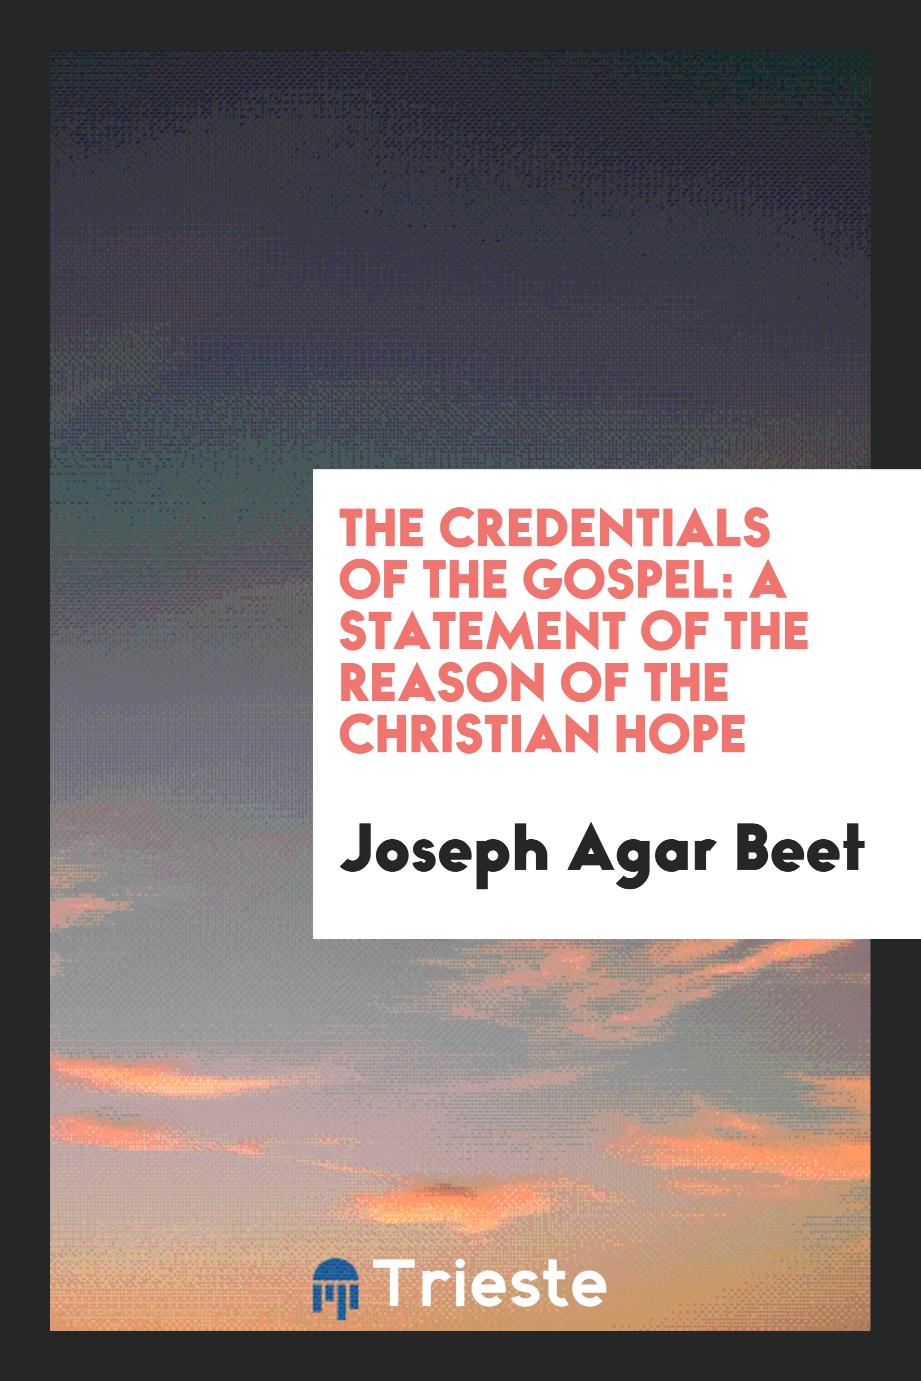 The credentials of the Gospel: a statement of the reason of the Christian hope